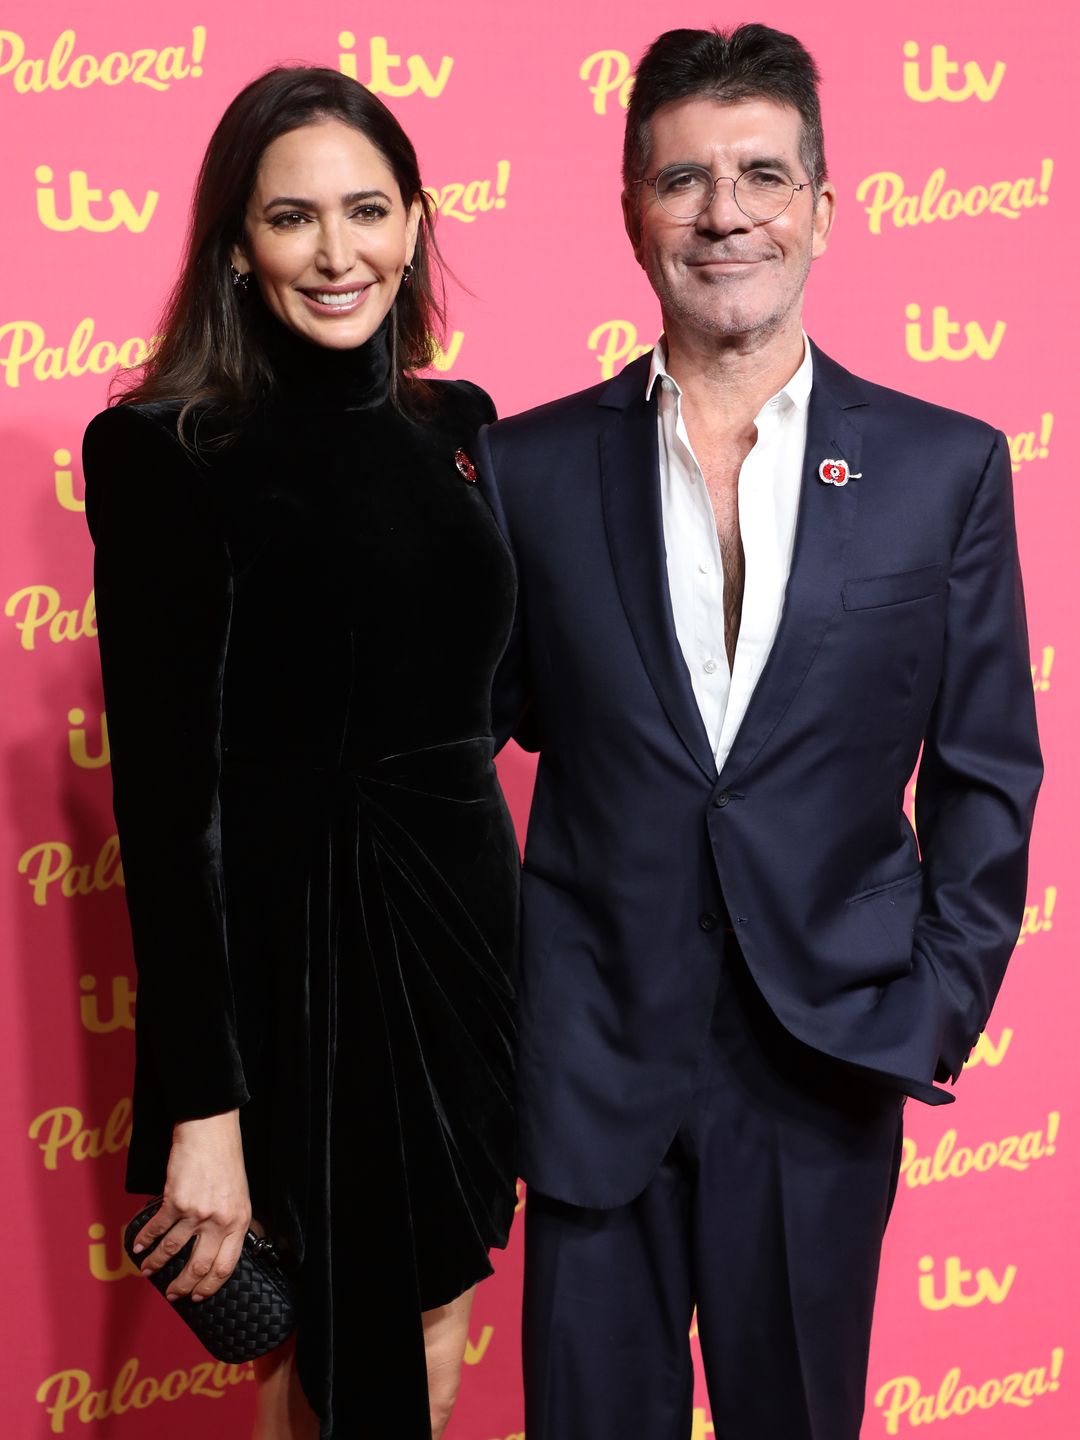 Simon and Lauren smiling on a red carpet